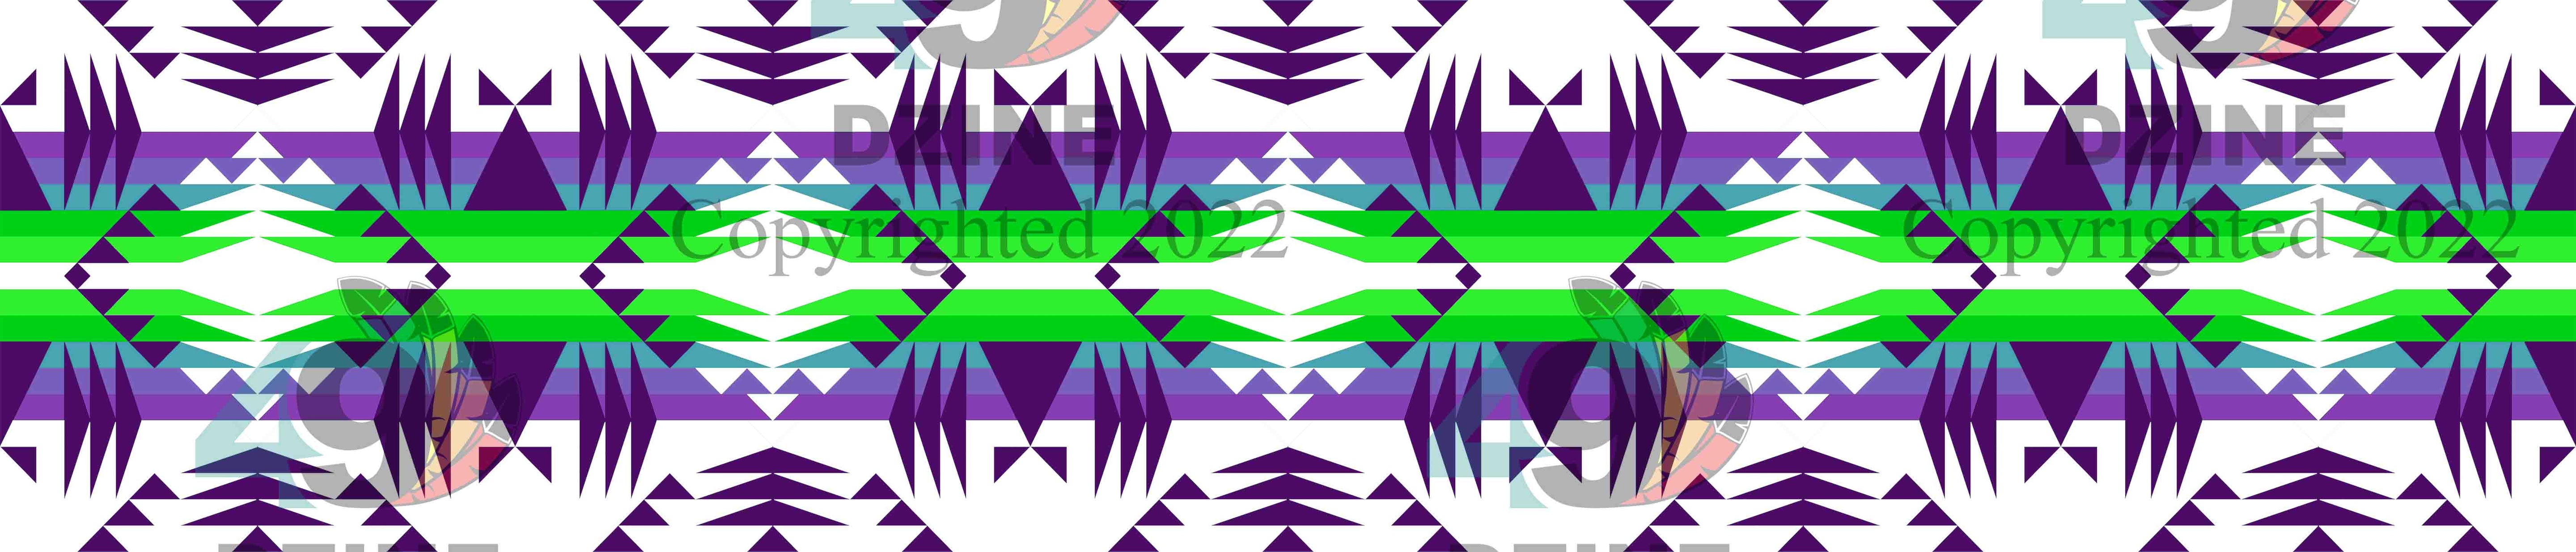 11-inch Geometric Transfer Between the Mountains Strip Transfers 49 Dzine Between the Mountains Strip Purple 